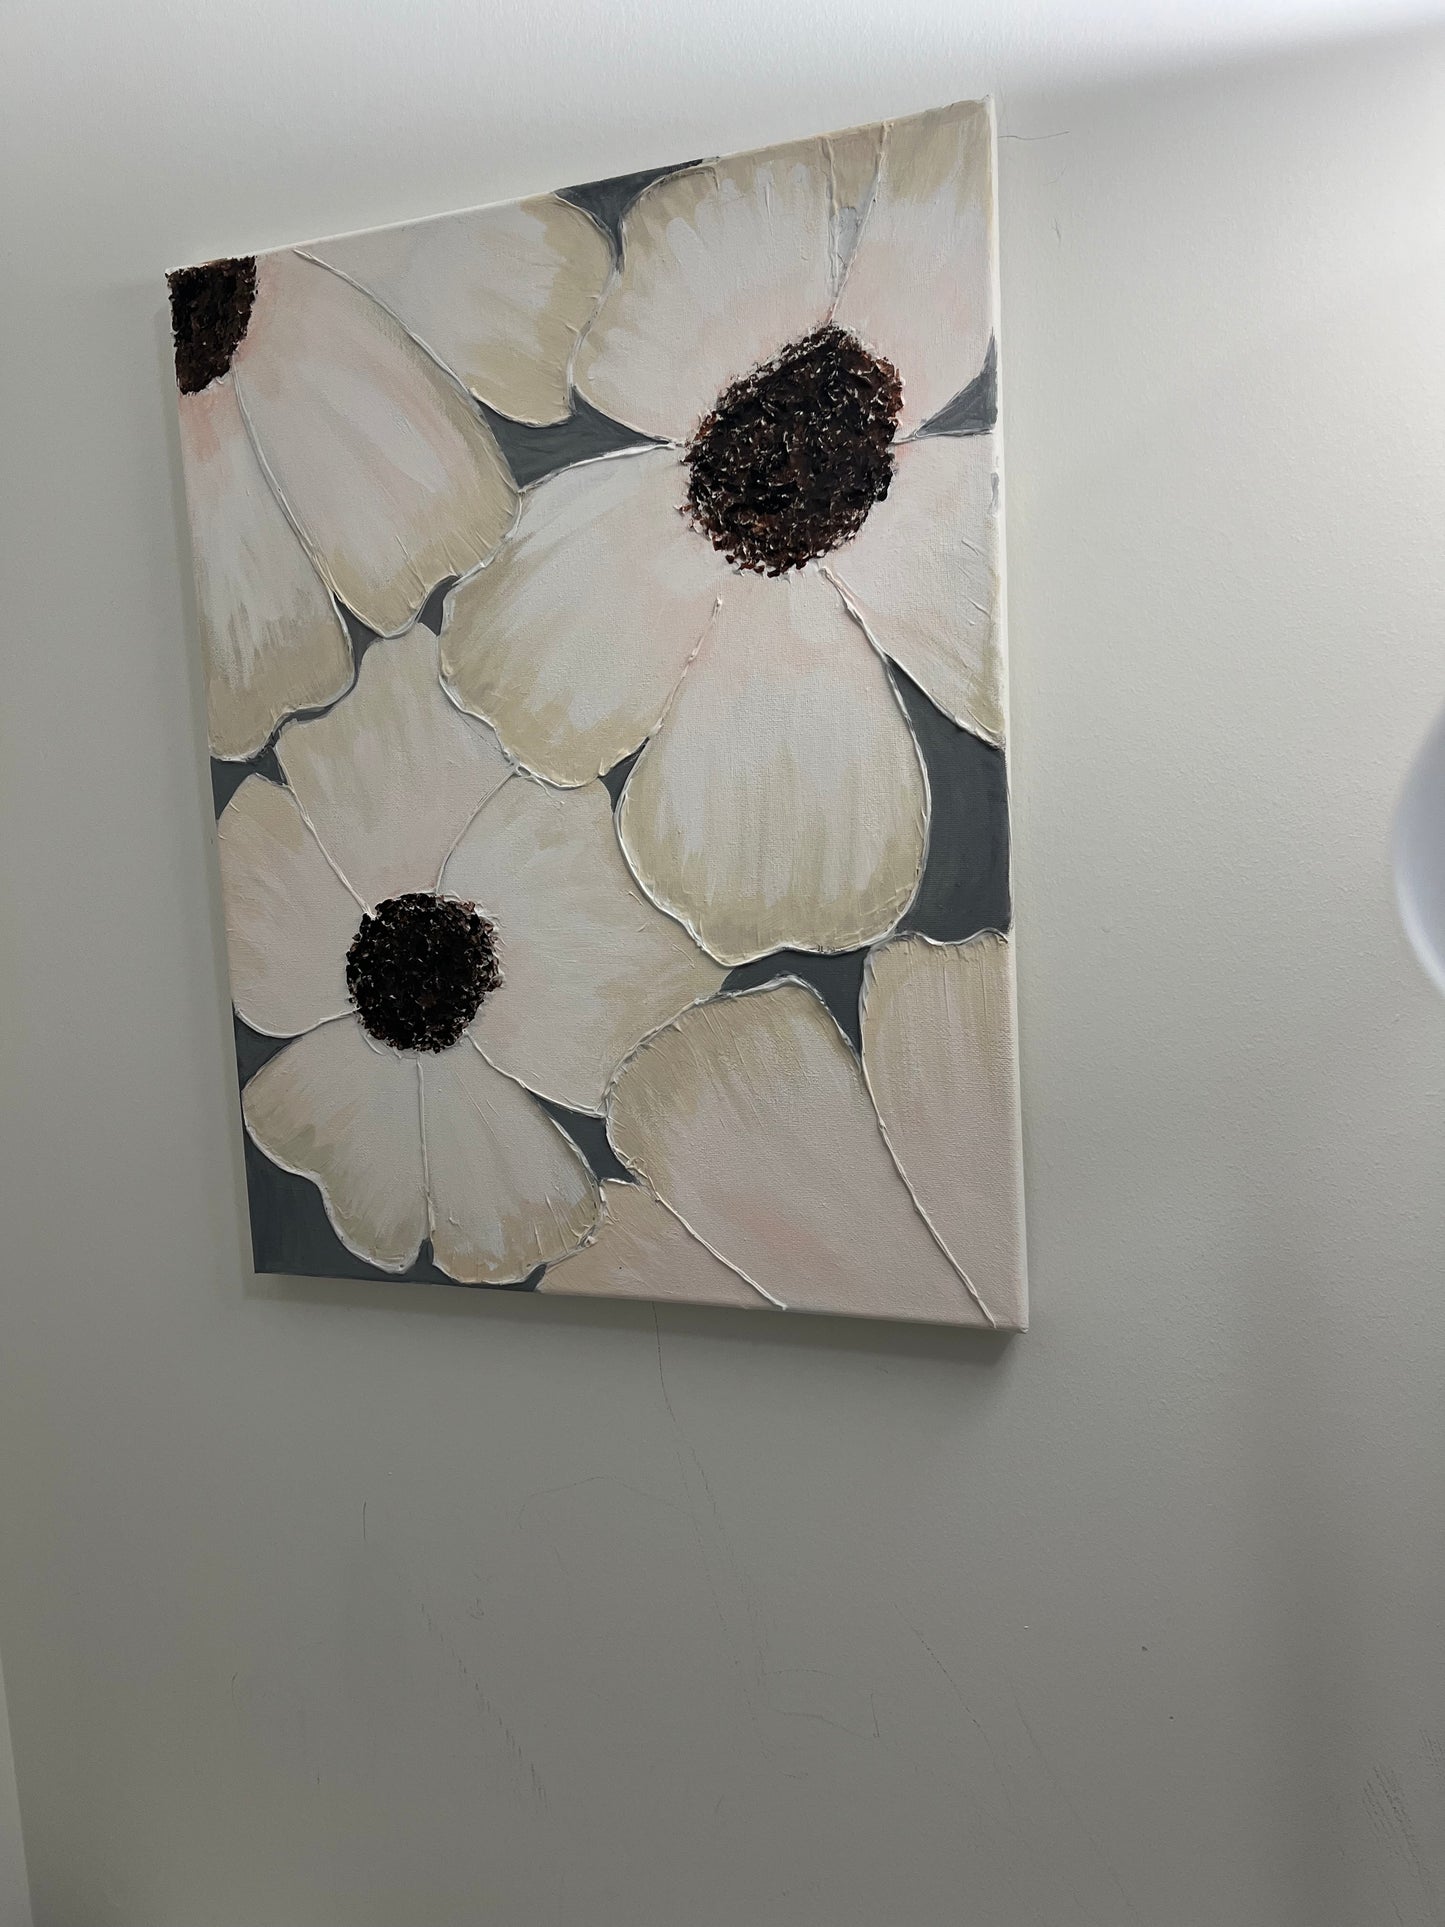 3D Flowers Painting on Canvas Original Acrylic Painting Heavy Textured Painting Floral Wall Decor